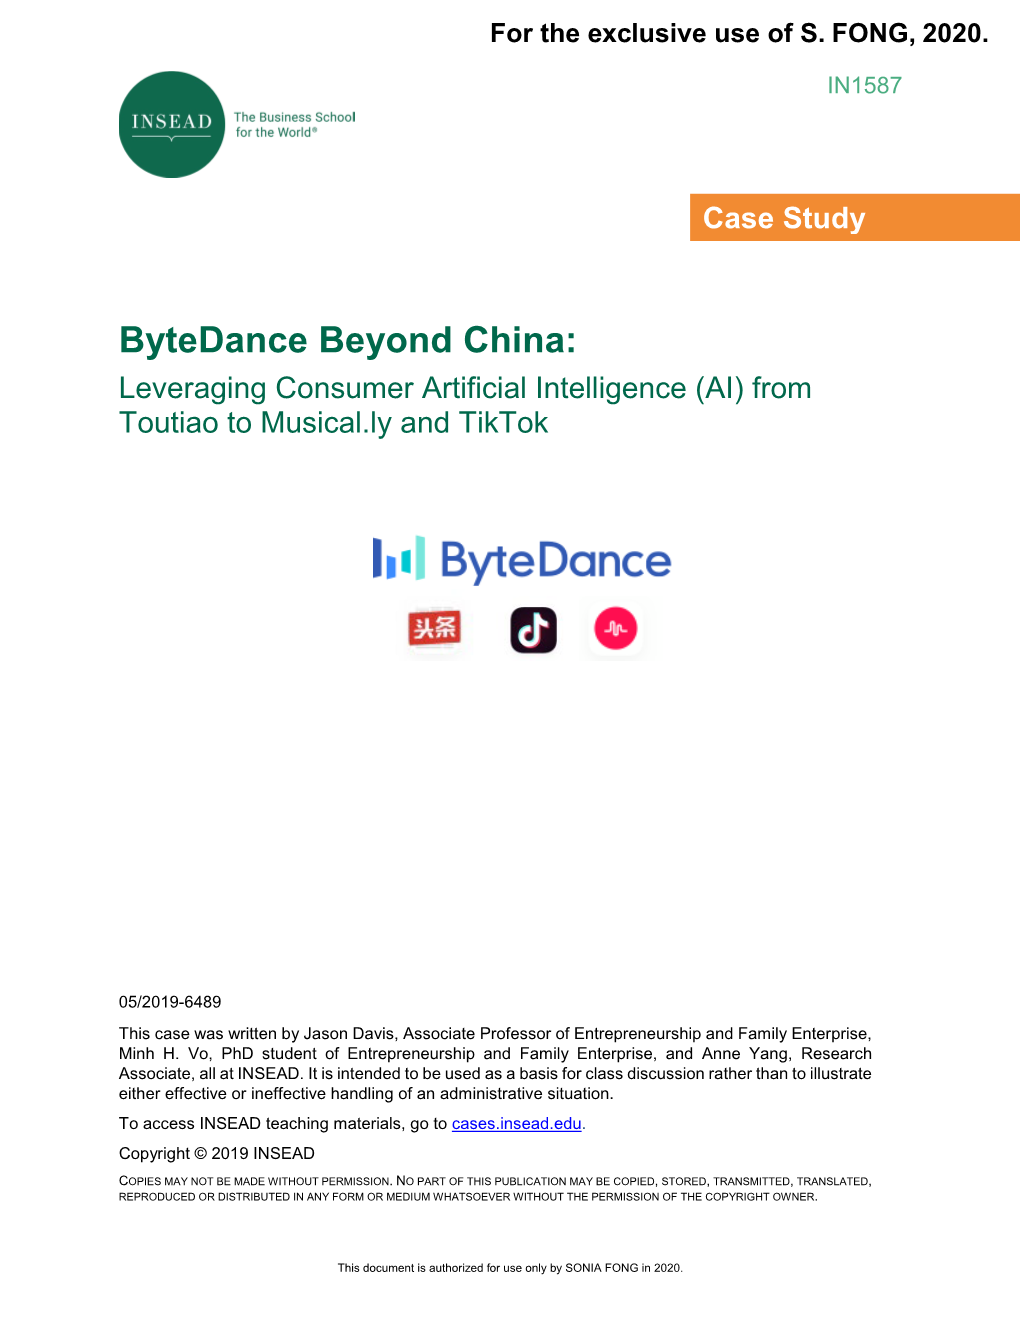 Bytedance Beyond China: Leveraging Consumer Artificial Intelligence (AI) from Toutiao to Musical.Ly and Tiktok